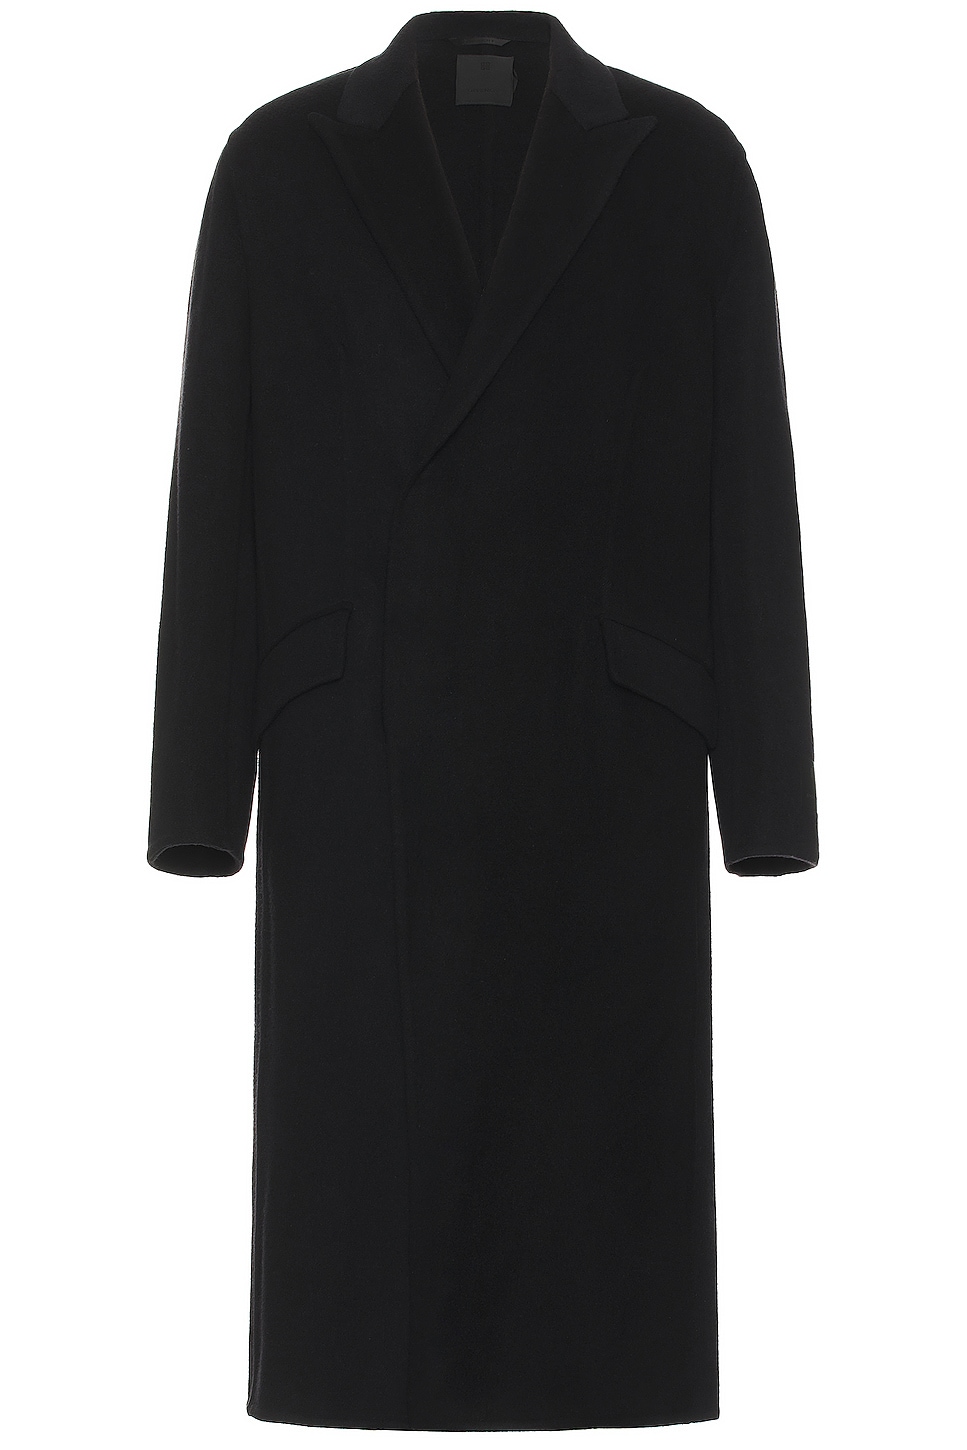 Image 1 of Givenchy Double Face Long Coat in Black